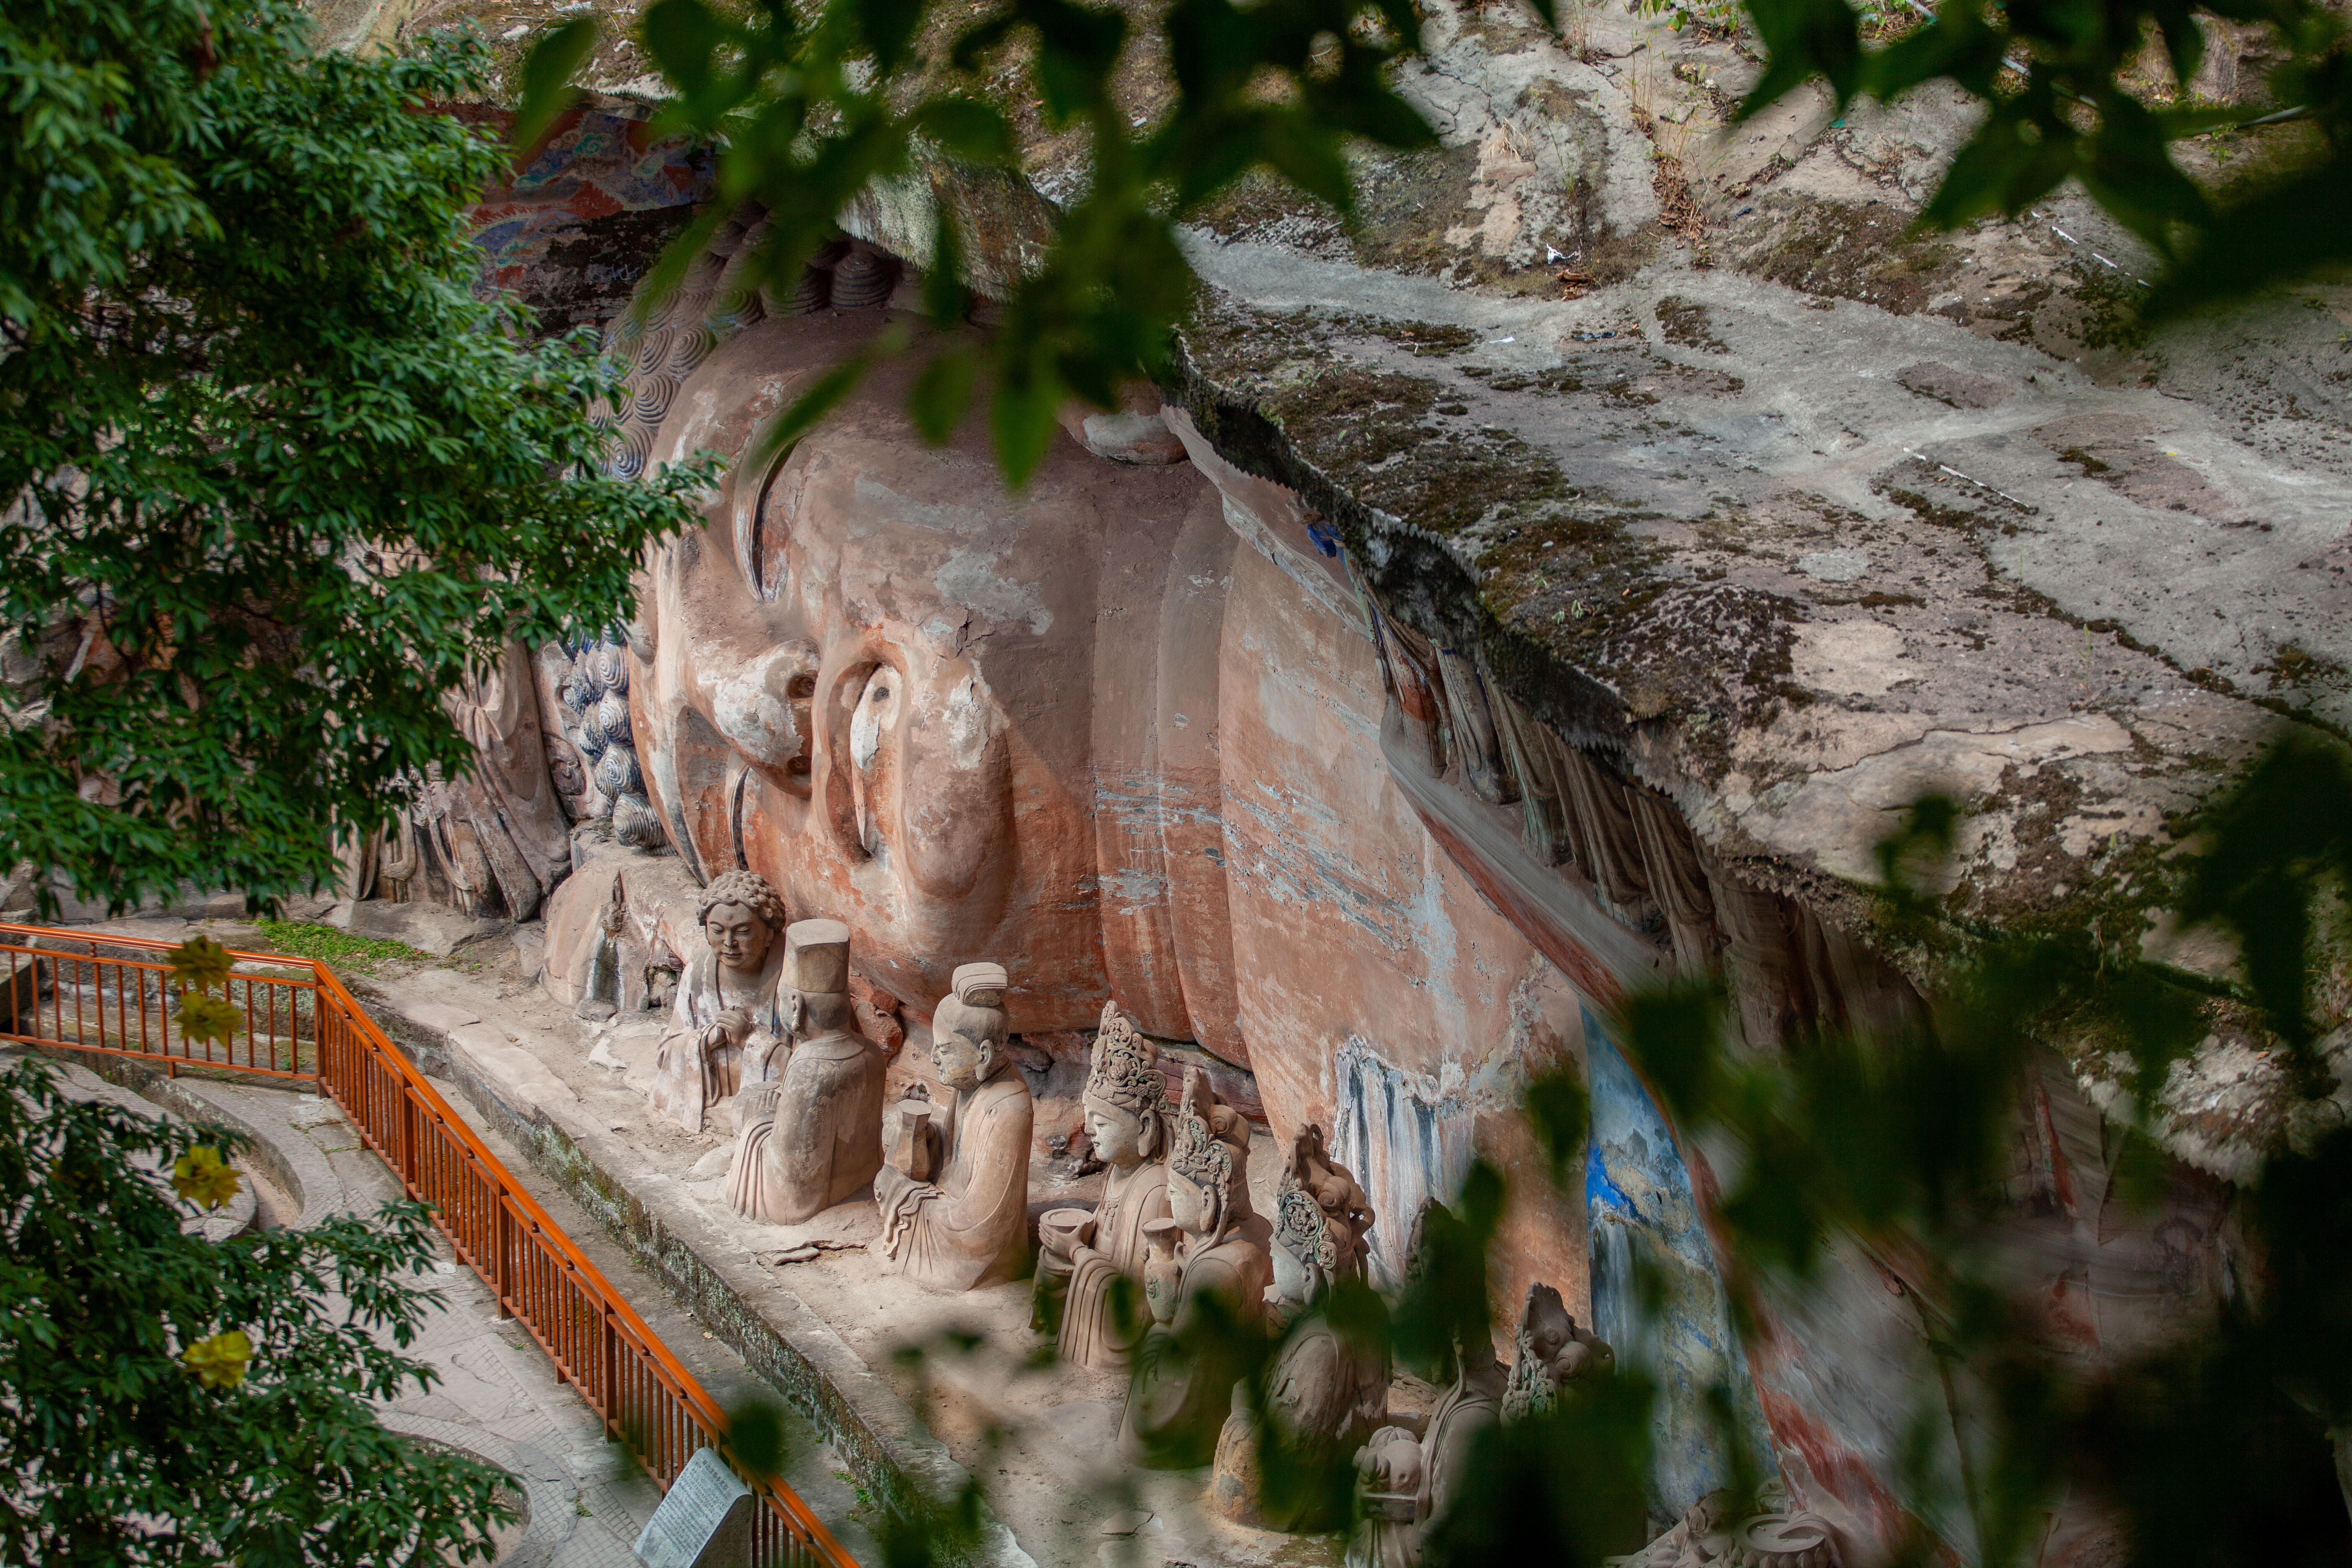 A photo shows the Dazu Rock Carvings, which are made up of tens of thousands of statues featuring delicate figures and patterns, in Chongqing. /CGTN